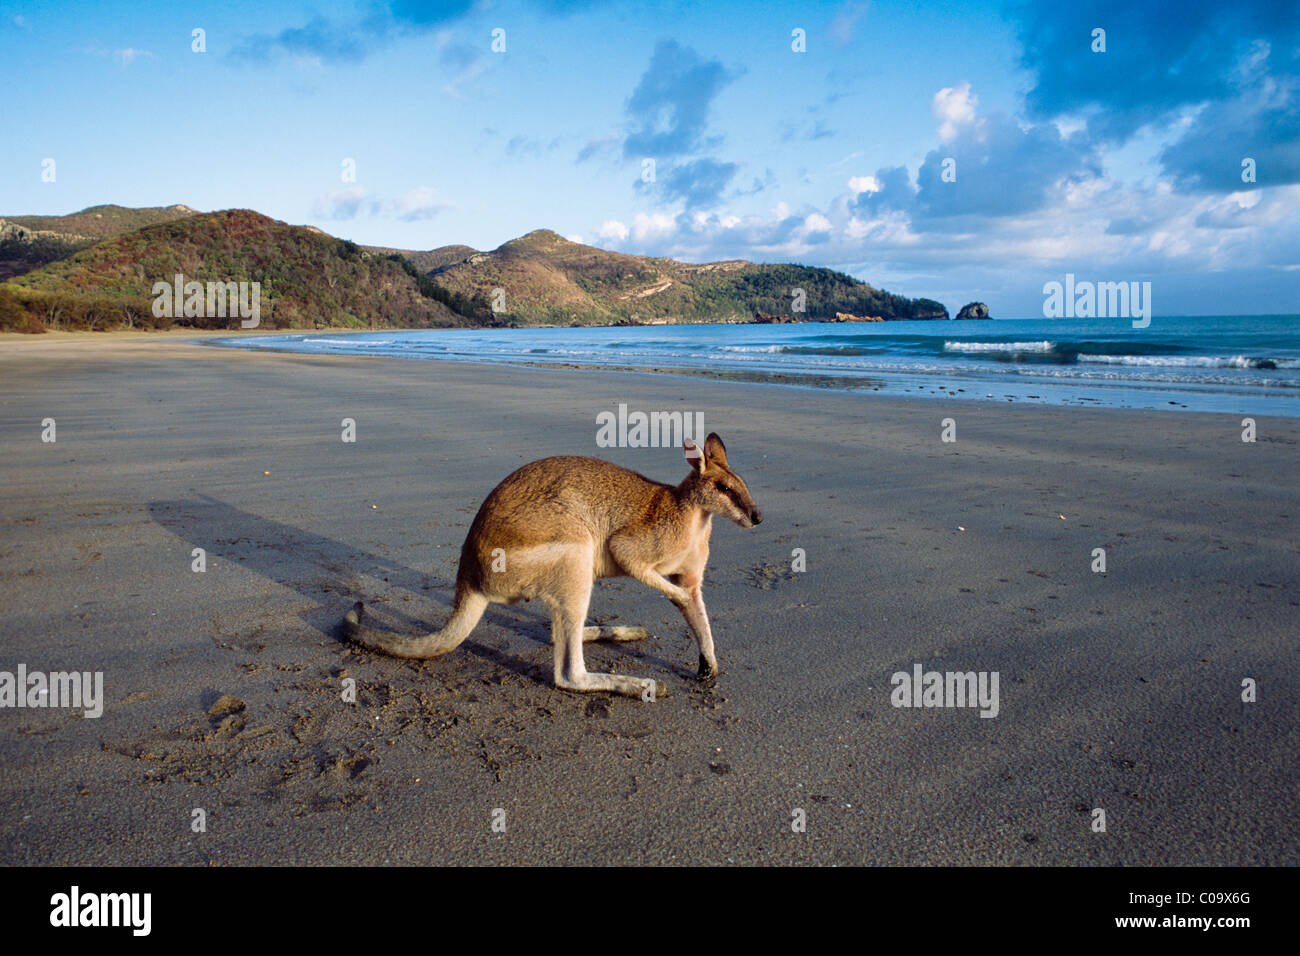 Pretty-faced Wallaby or Whiptail Wallaby (Macropus parryi) on a beach, Queensland, Australia Stock Photo